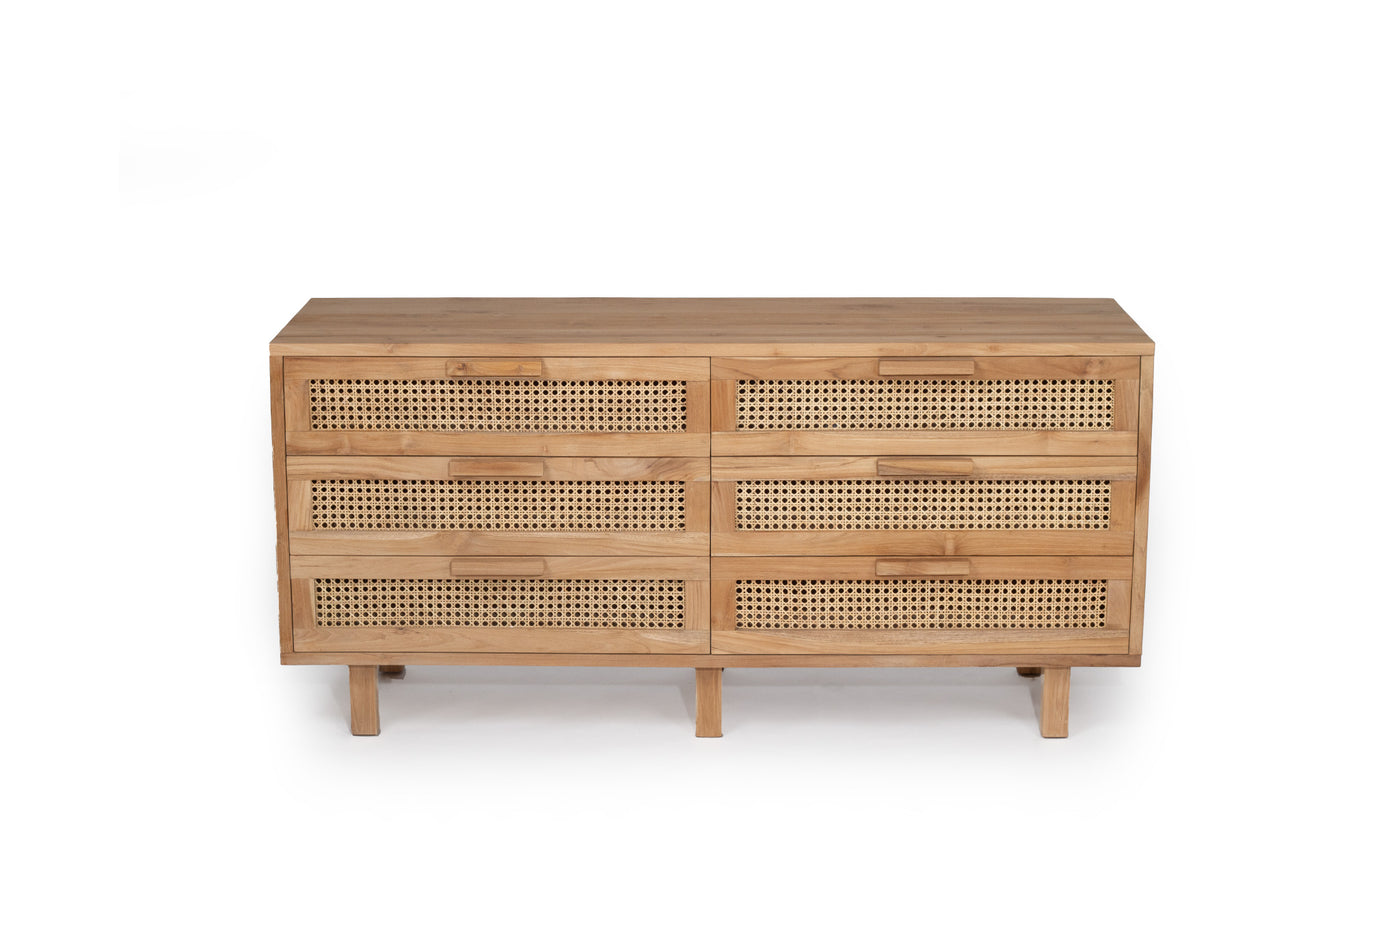 Danielle Chest Of Drawers - Natural - 160cm